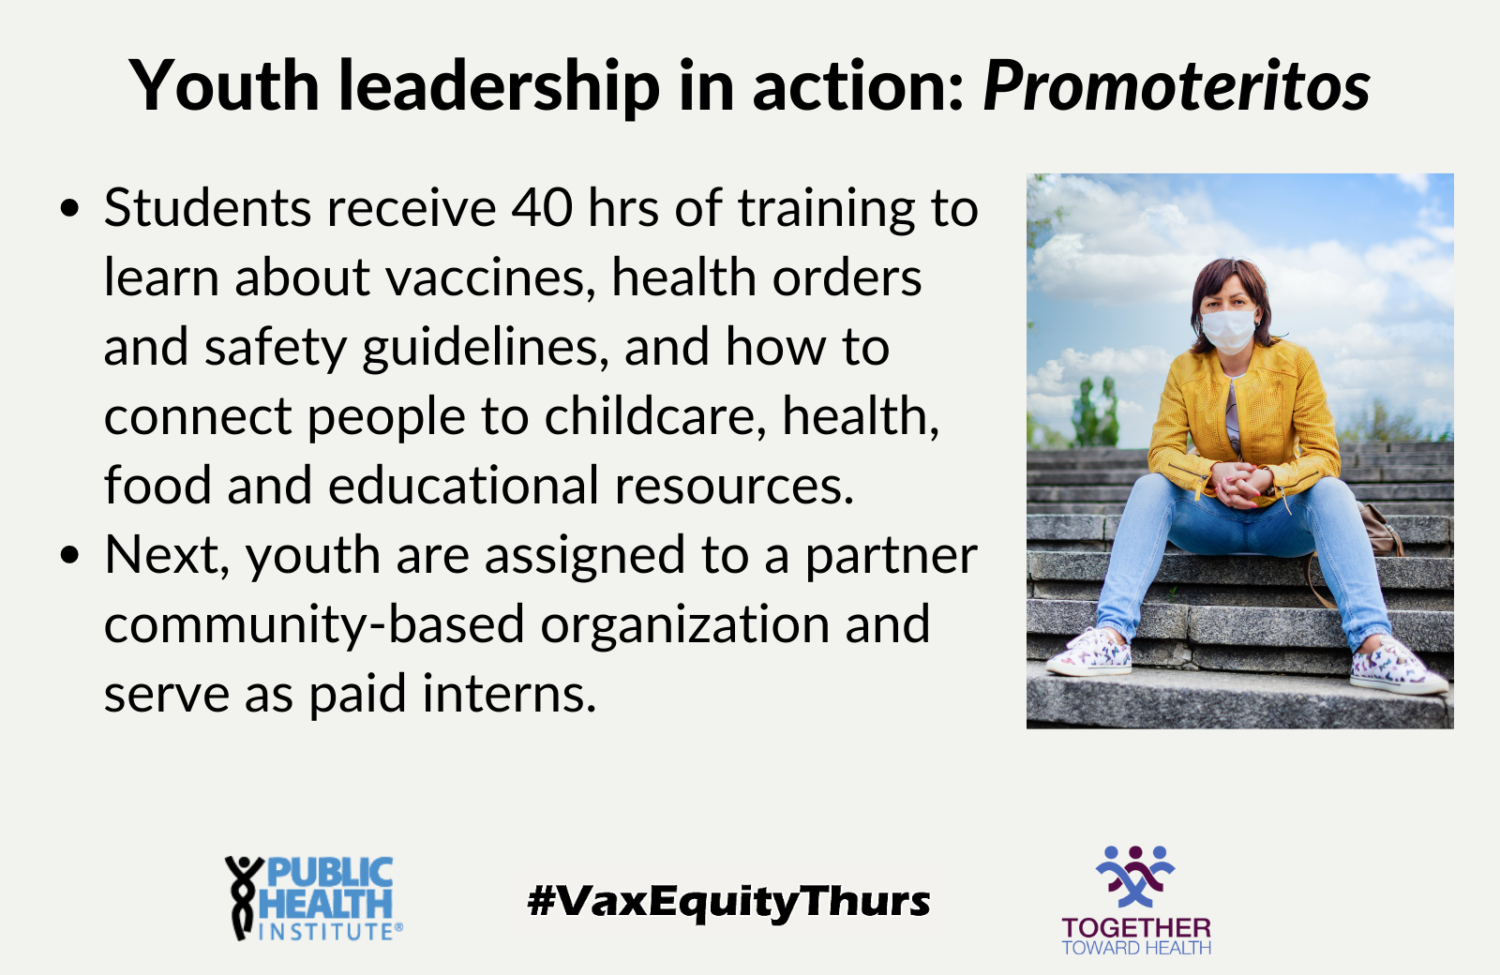 Youth leadership in action: Students receive 40 hrs of training to learn about vaccines, health orders and safety guidelines, and how to connect people to childcare, health, food and educational resources. Next, youth are assigned to a partner community-based organization and serve as paid interns.